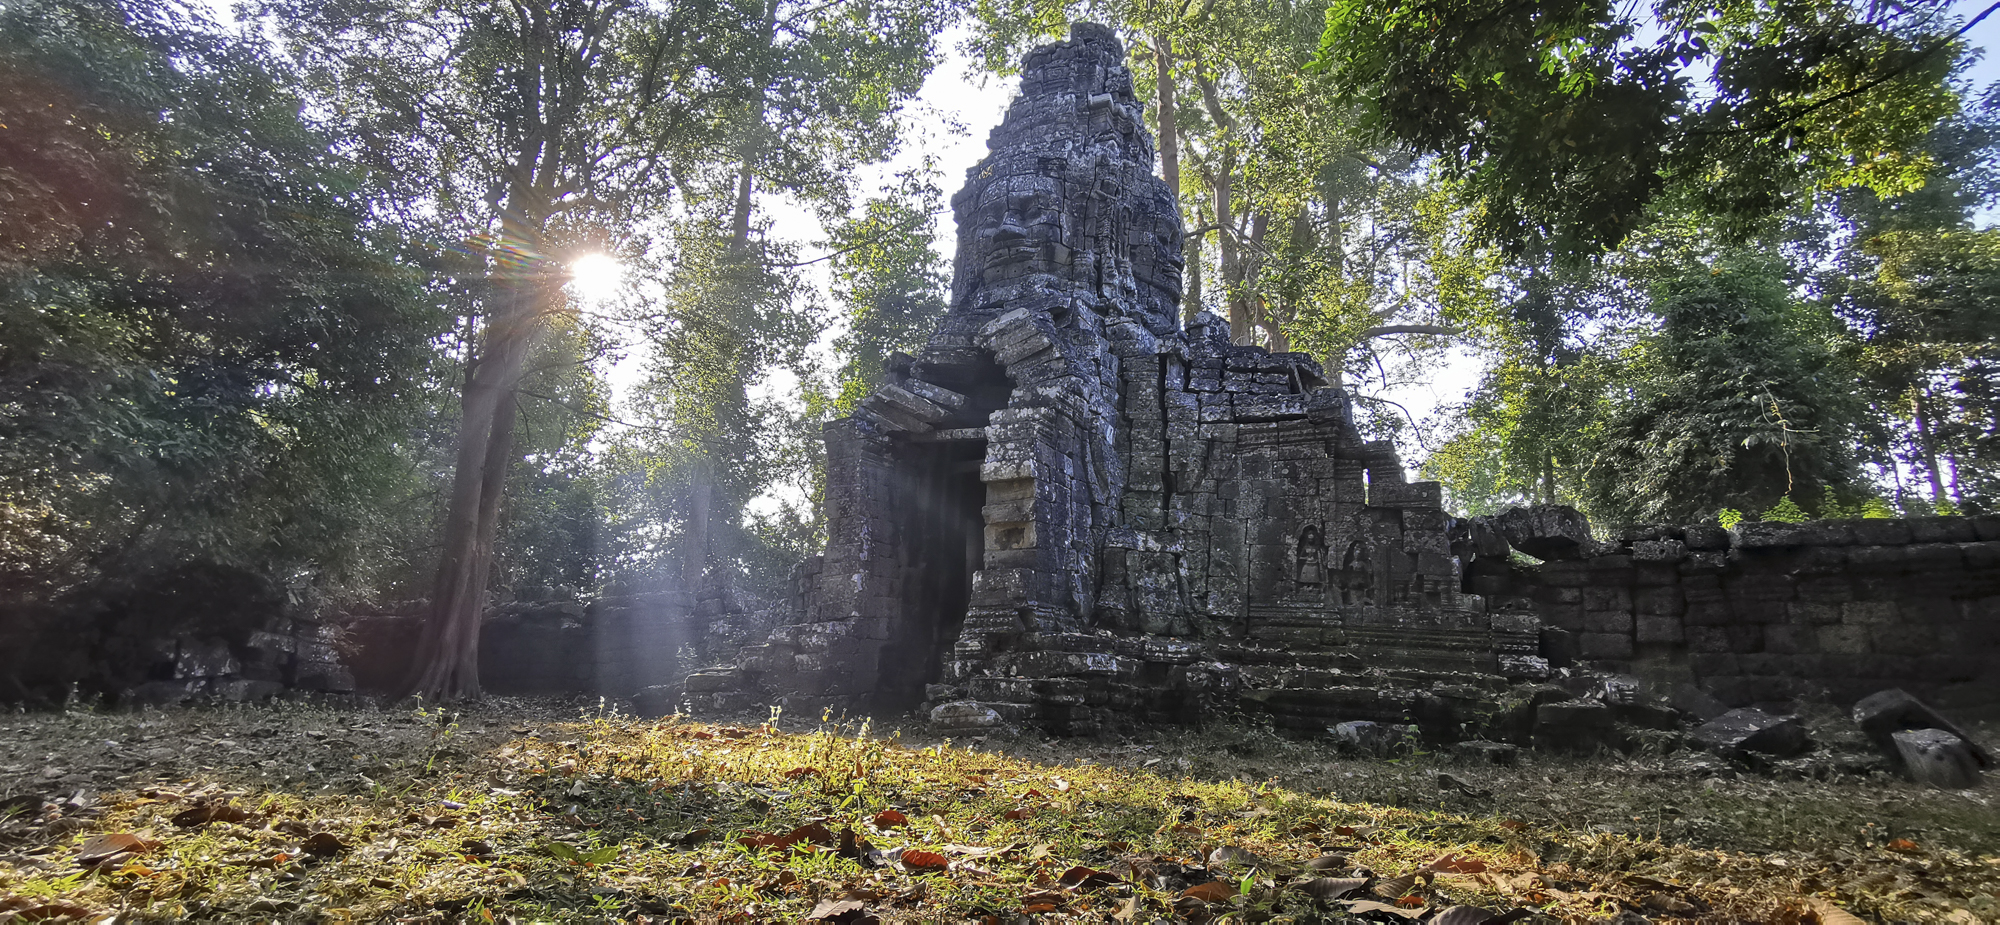 Cambodia is open for photographers to discover  NOW!